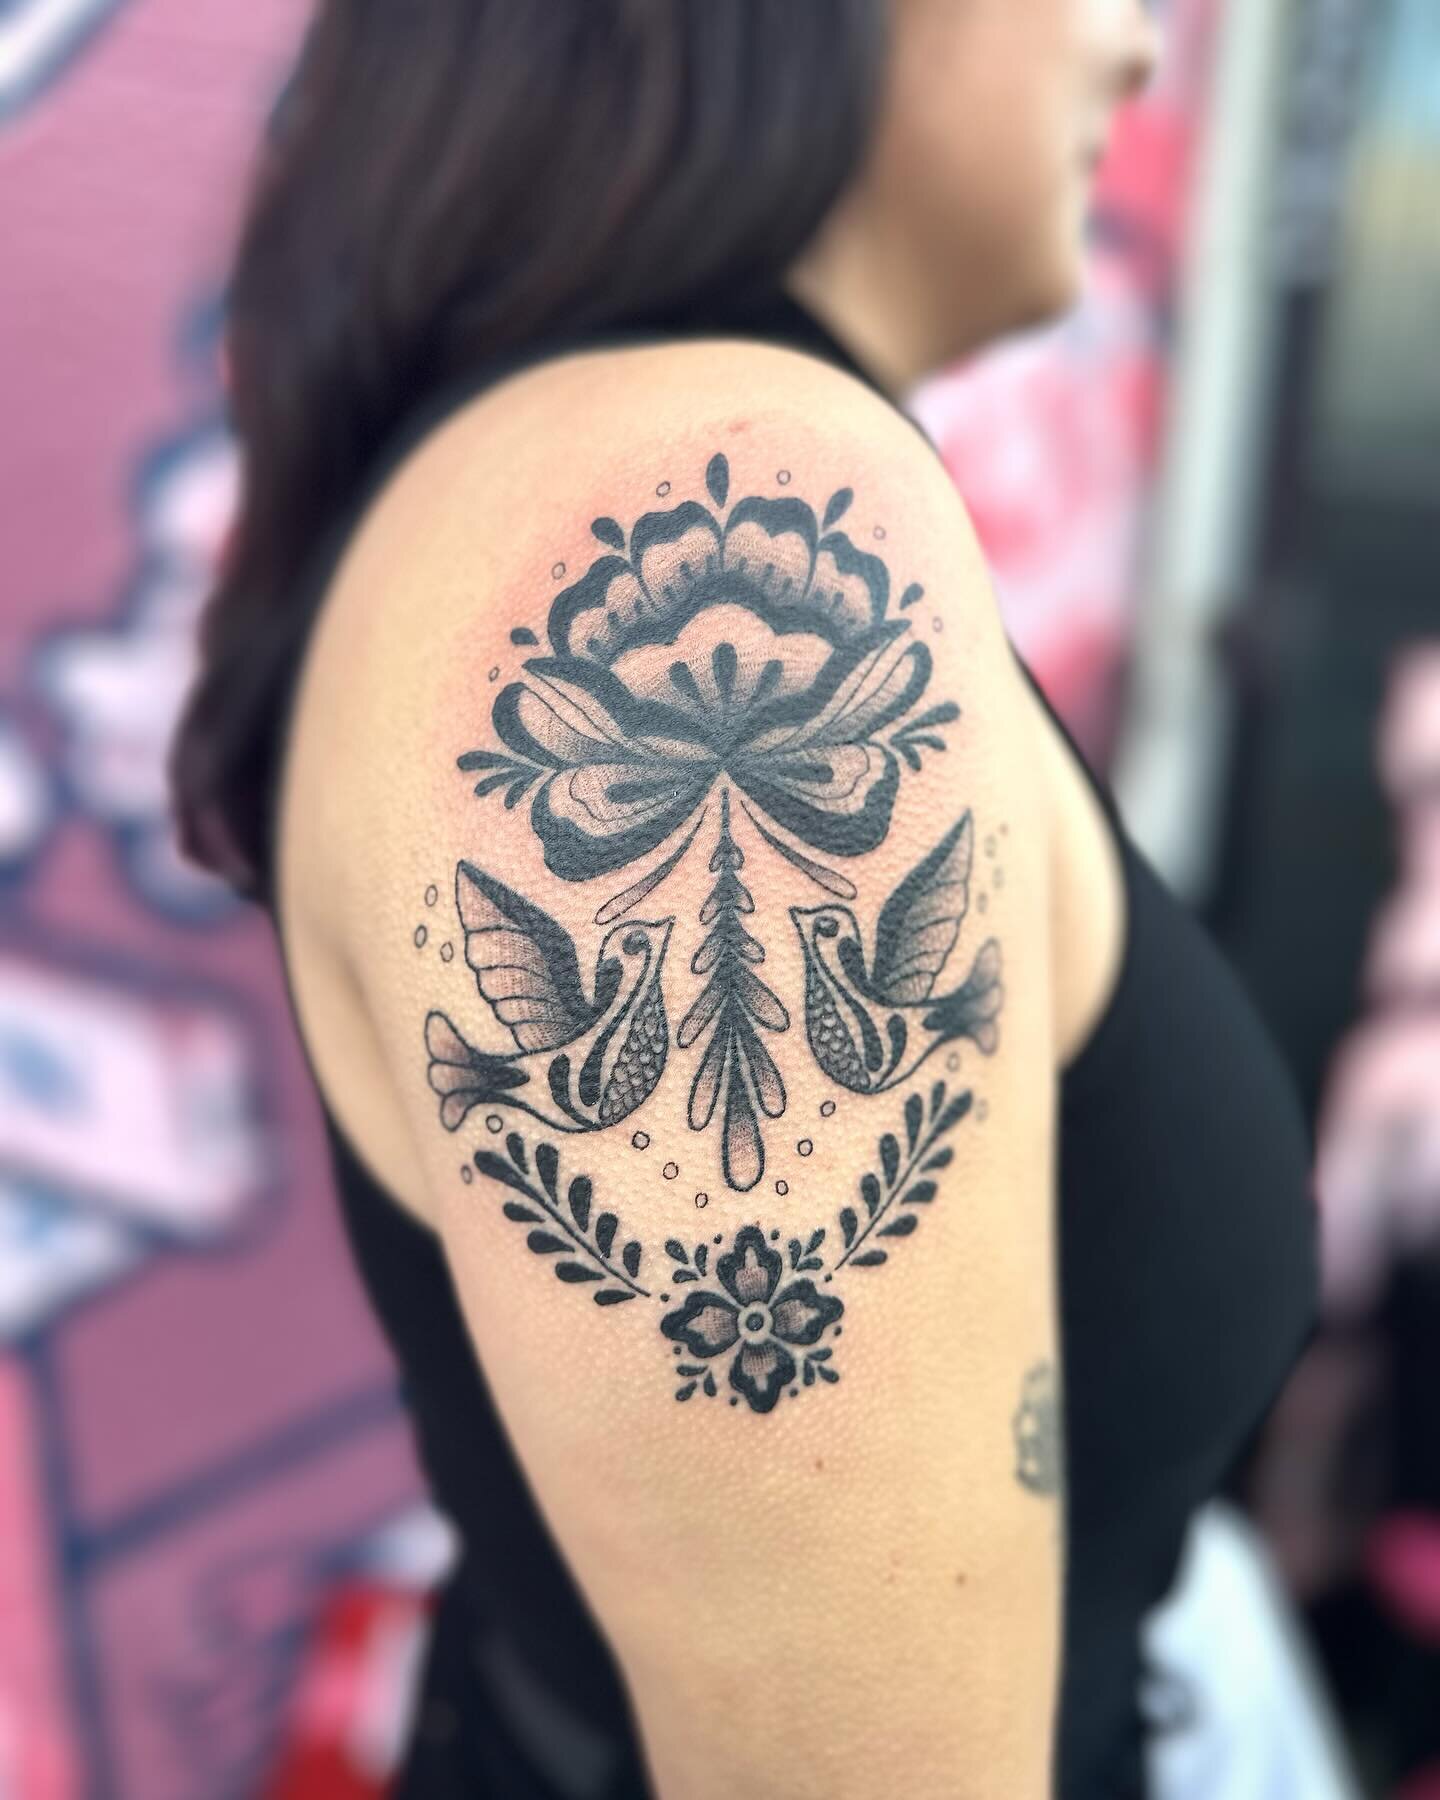 I looovveed doing this custom Talavera inspired piece! February books are open and thank you so so much to everyone who gets tattooed 🙏🥳
&bull;
&bull;
&bull;
&bull;
&bull;
&bull;
&bull;
&bull;
&bull;
#talaverapottery #talaveratattoo #blackandgreyta